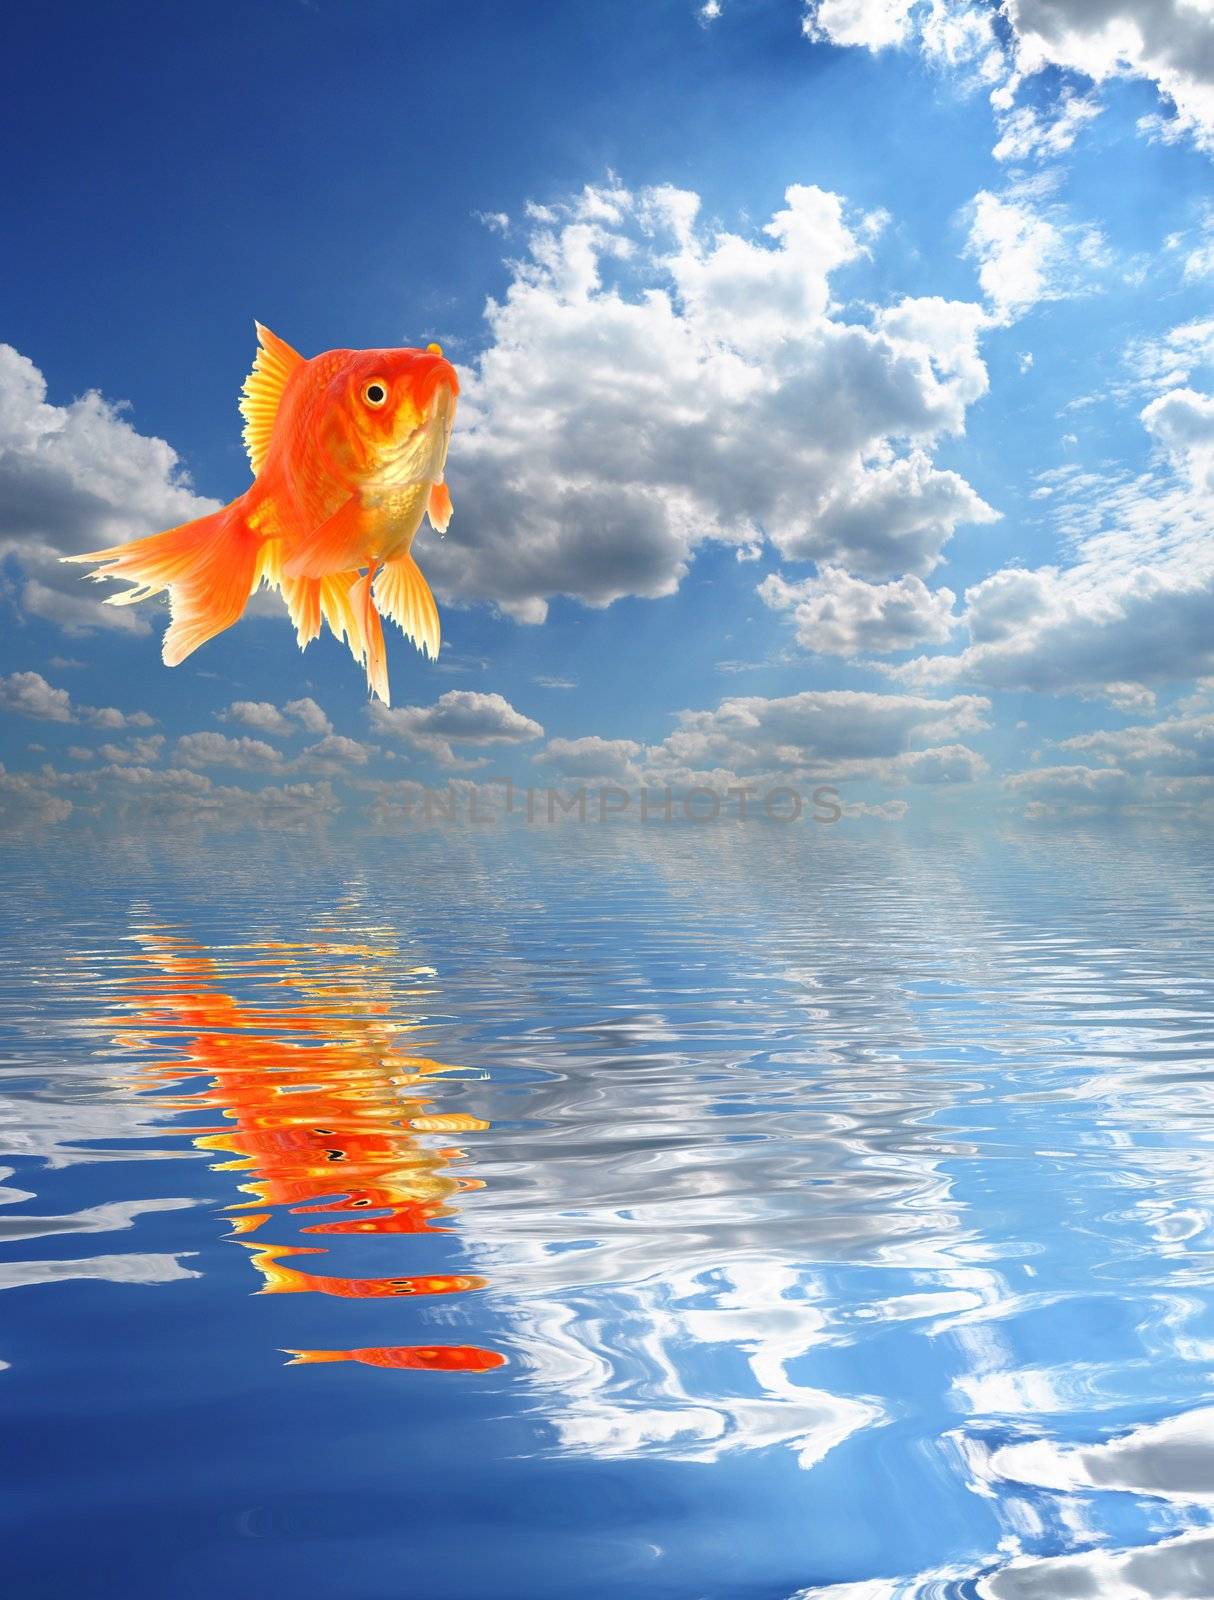 jumping goldfish and ocean with sky and water reflection